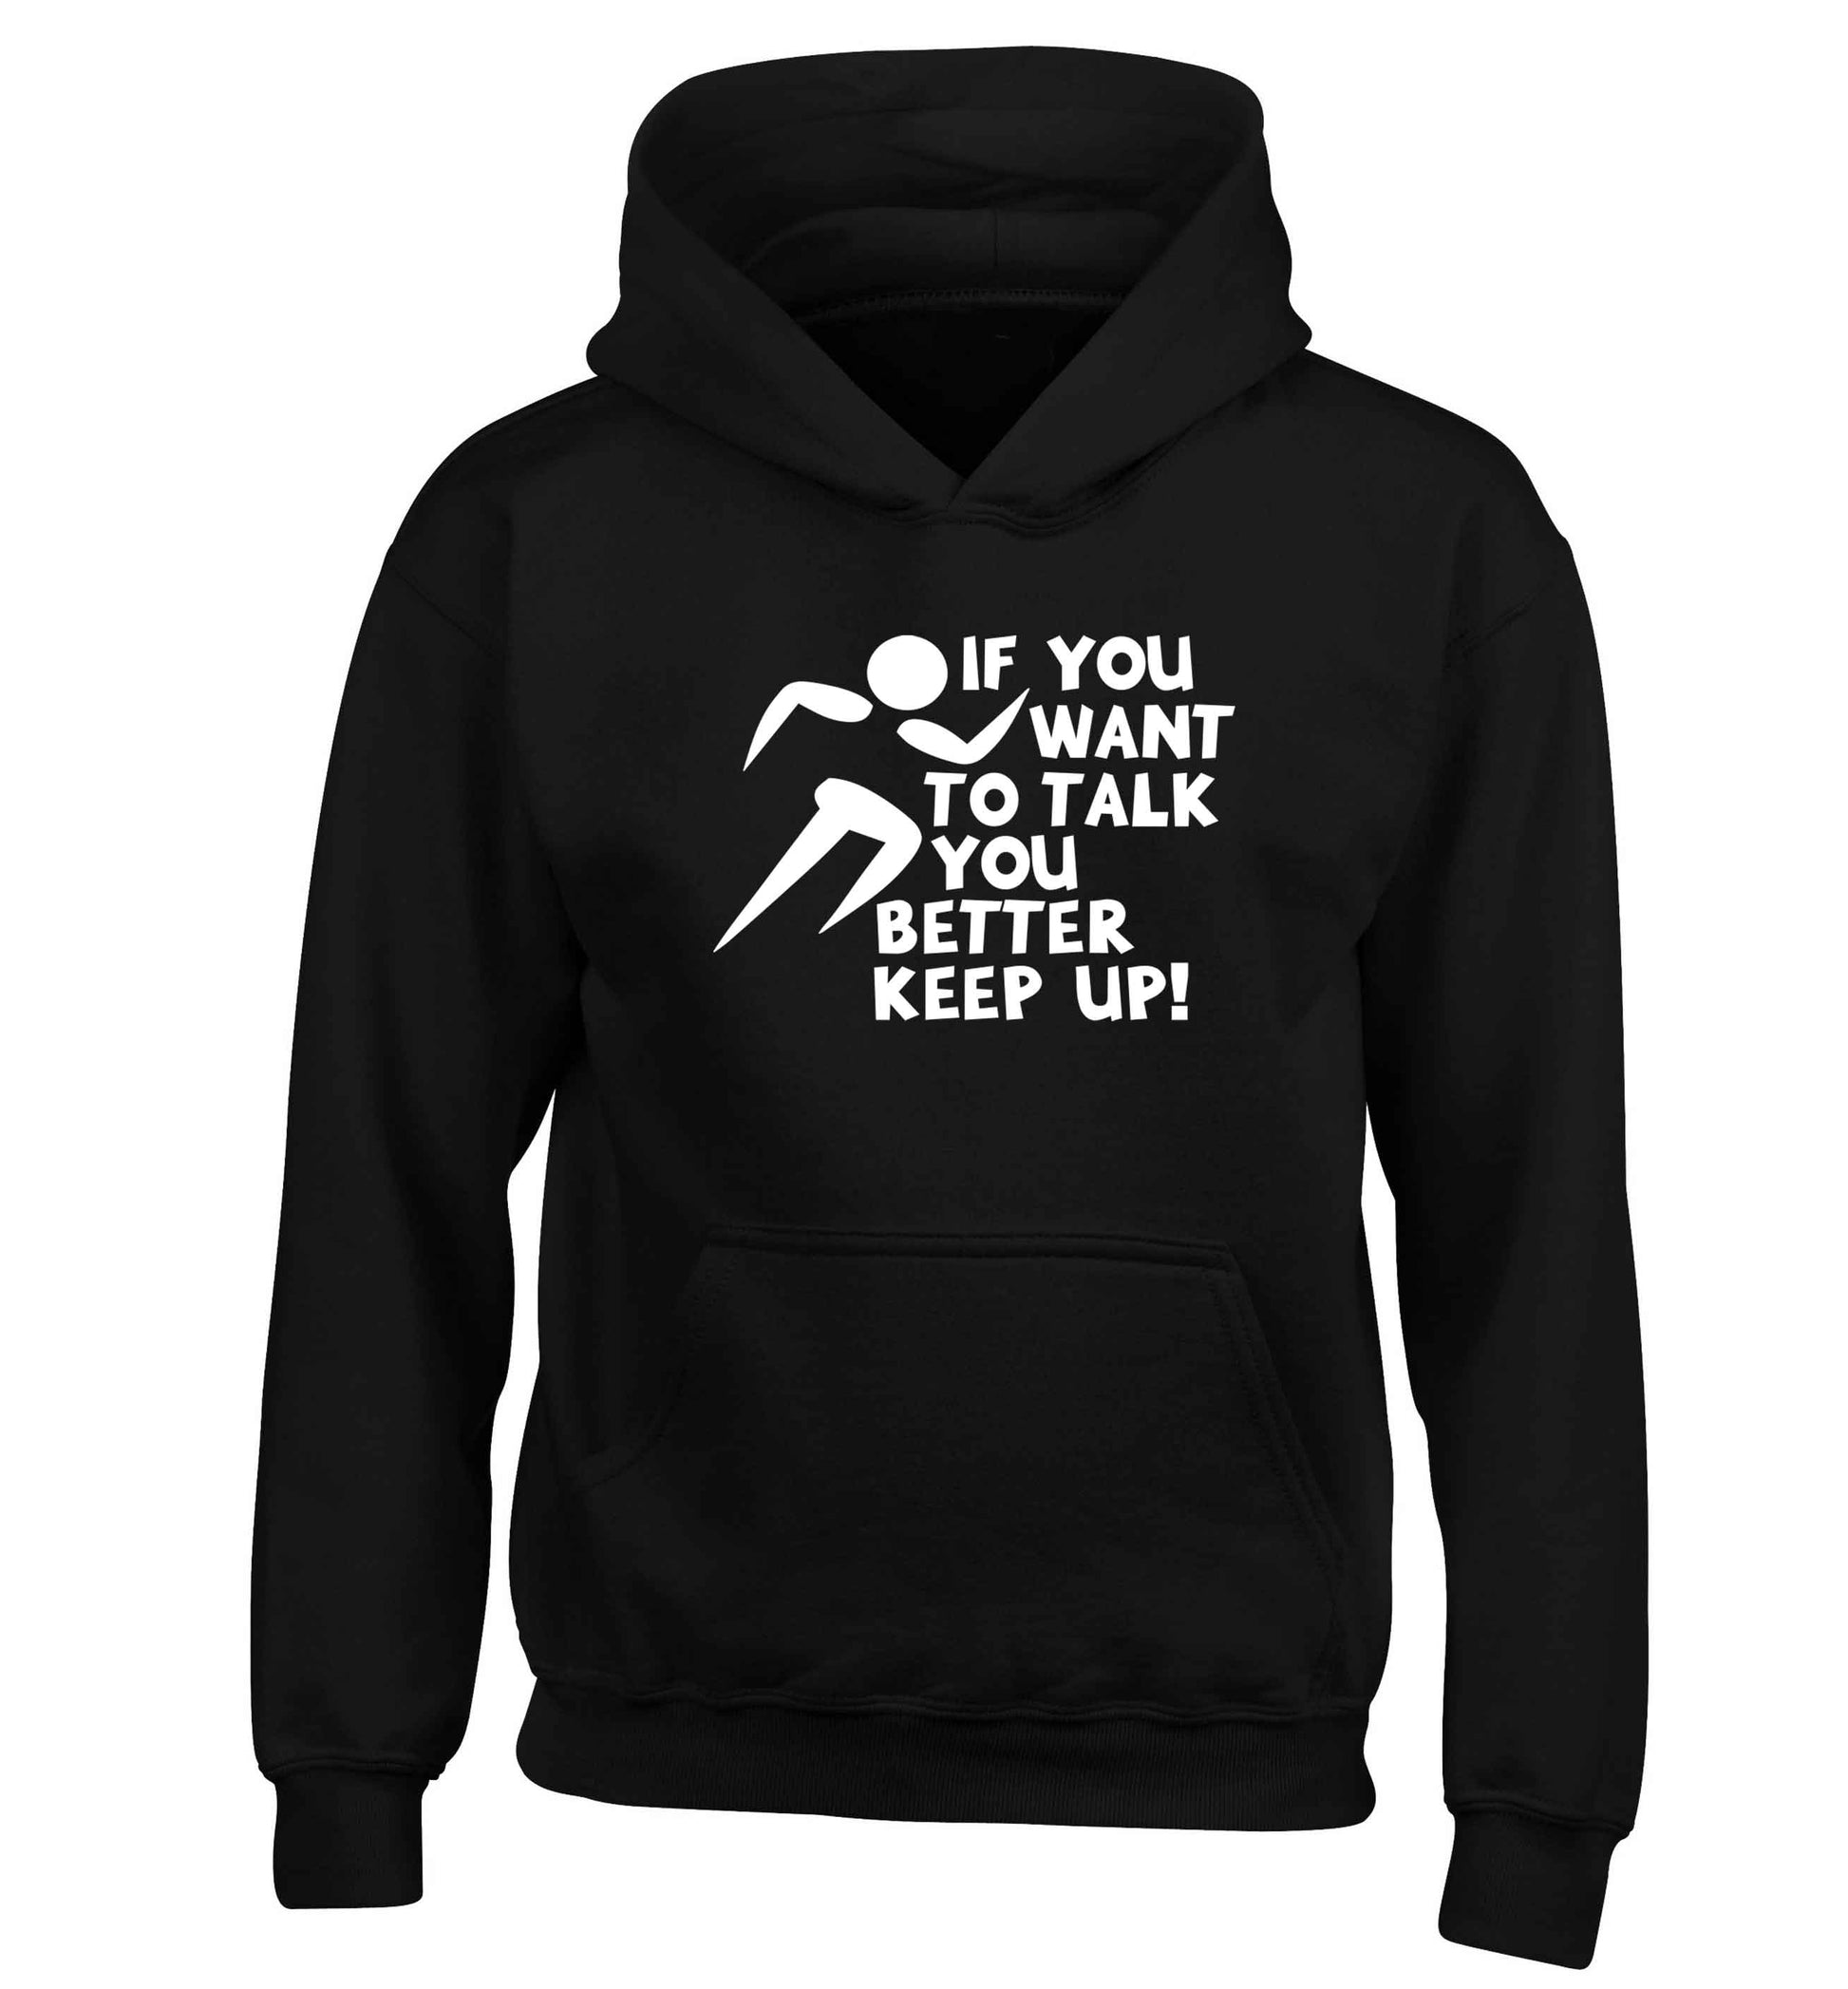 If you want to talk you better keep up! children's black hoodie 12-13 Years